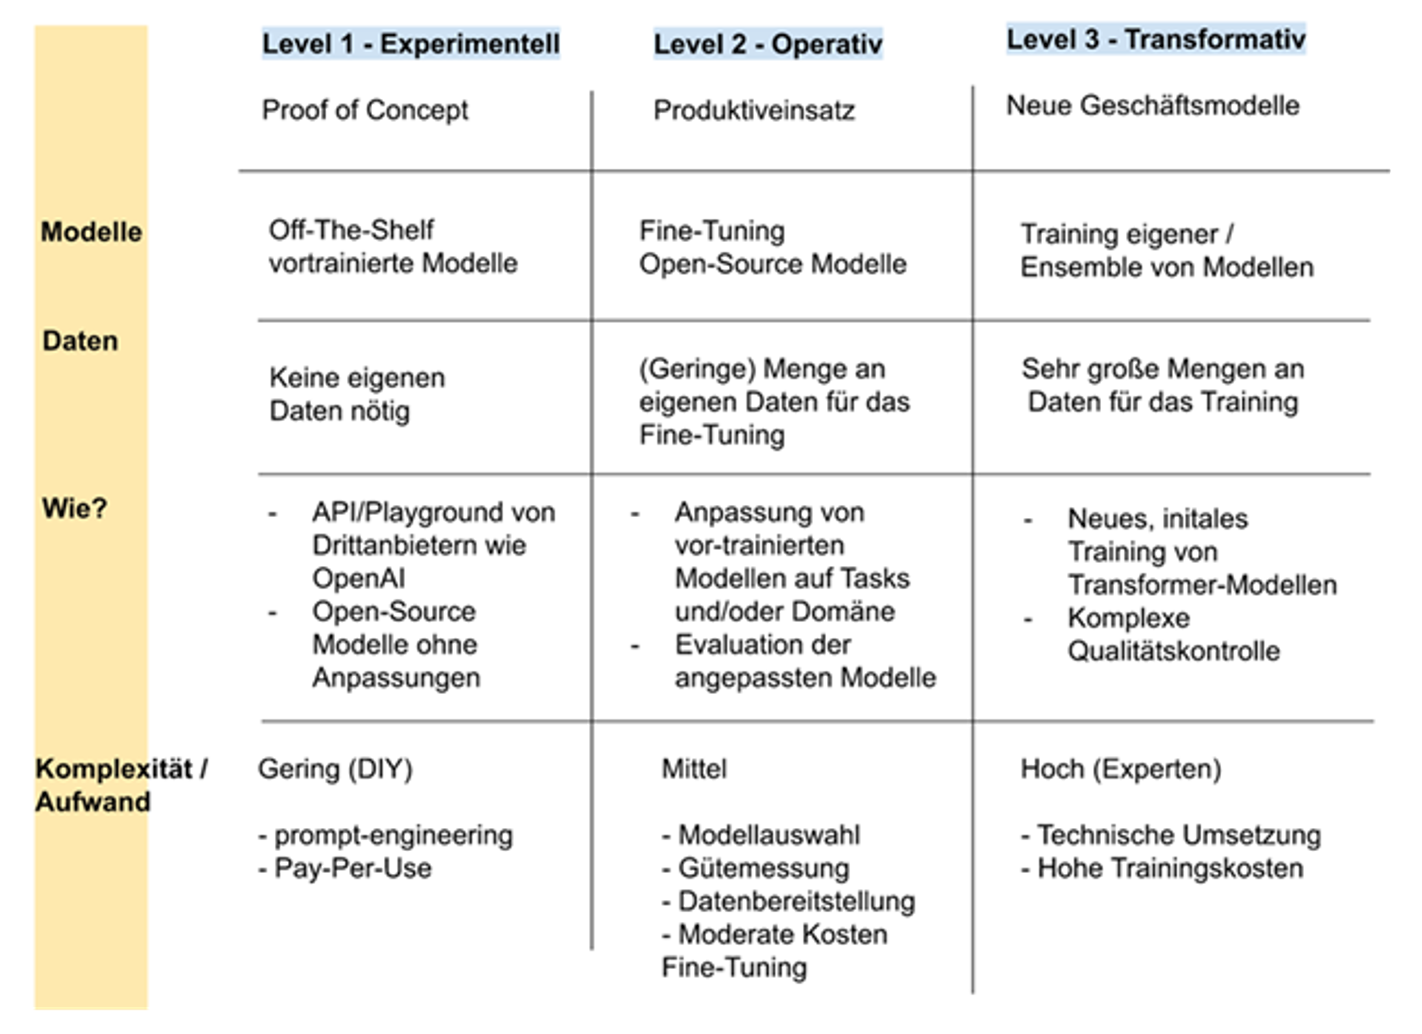 Figure: Maturity model for the introduction of foundation models